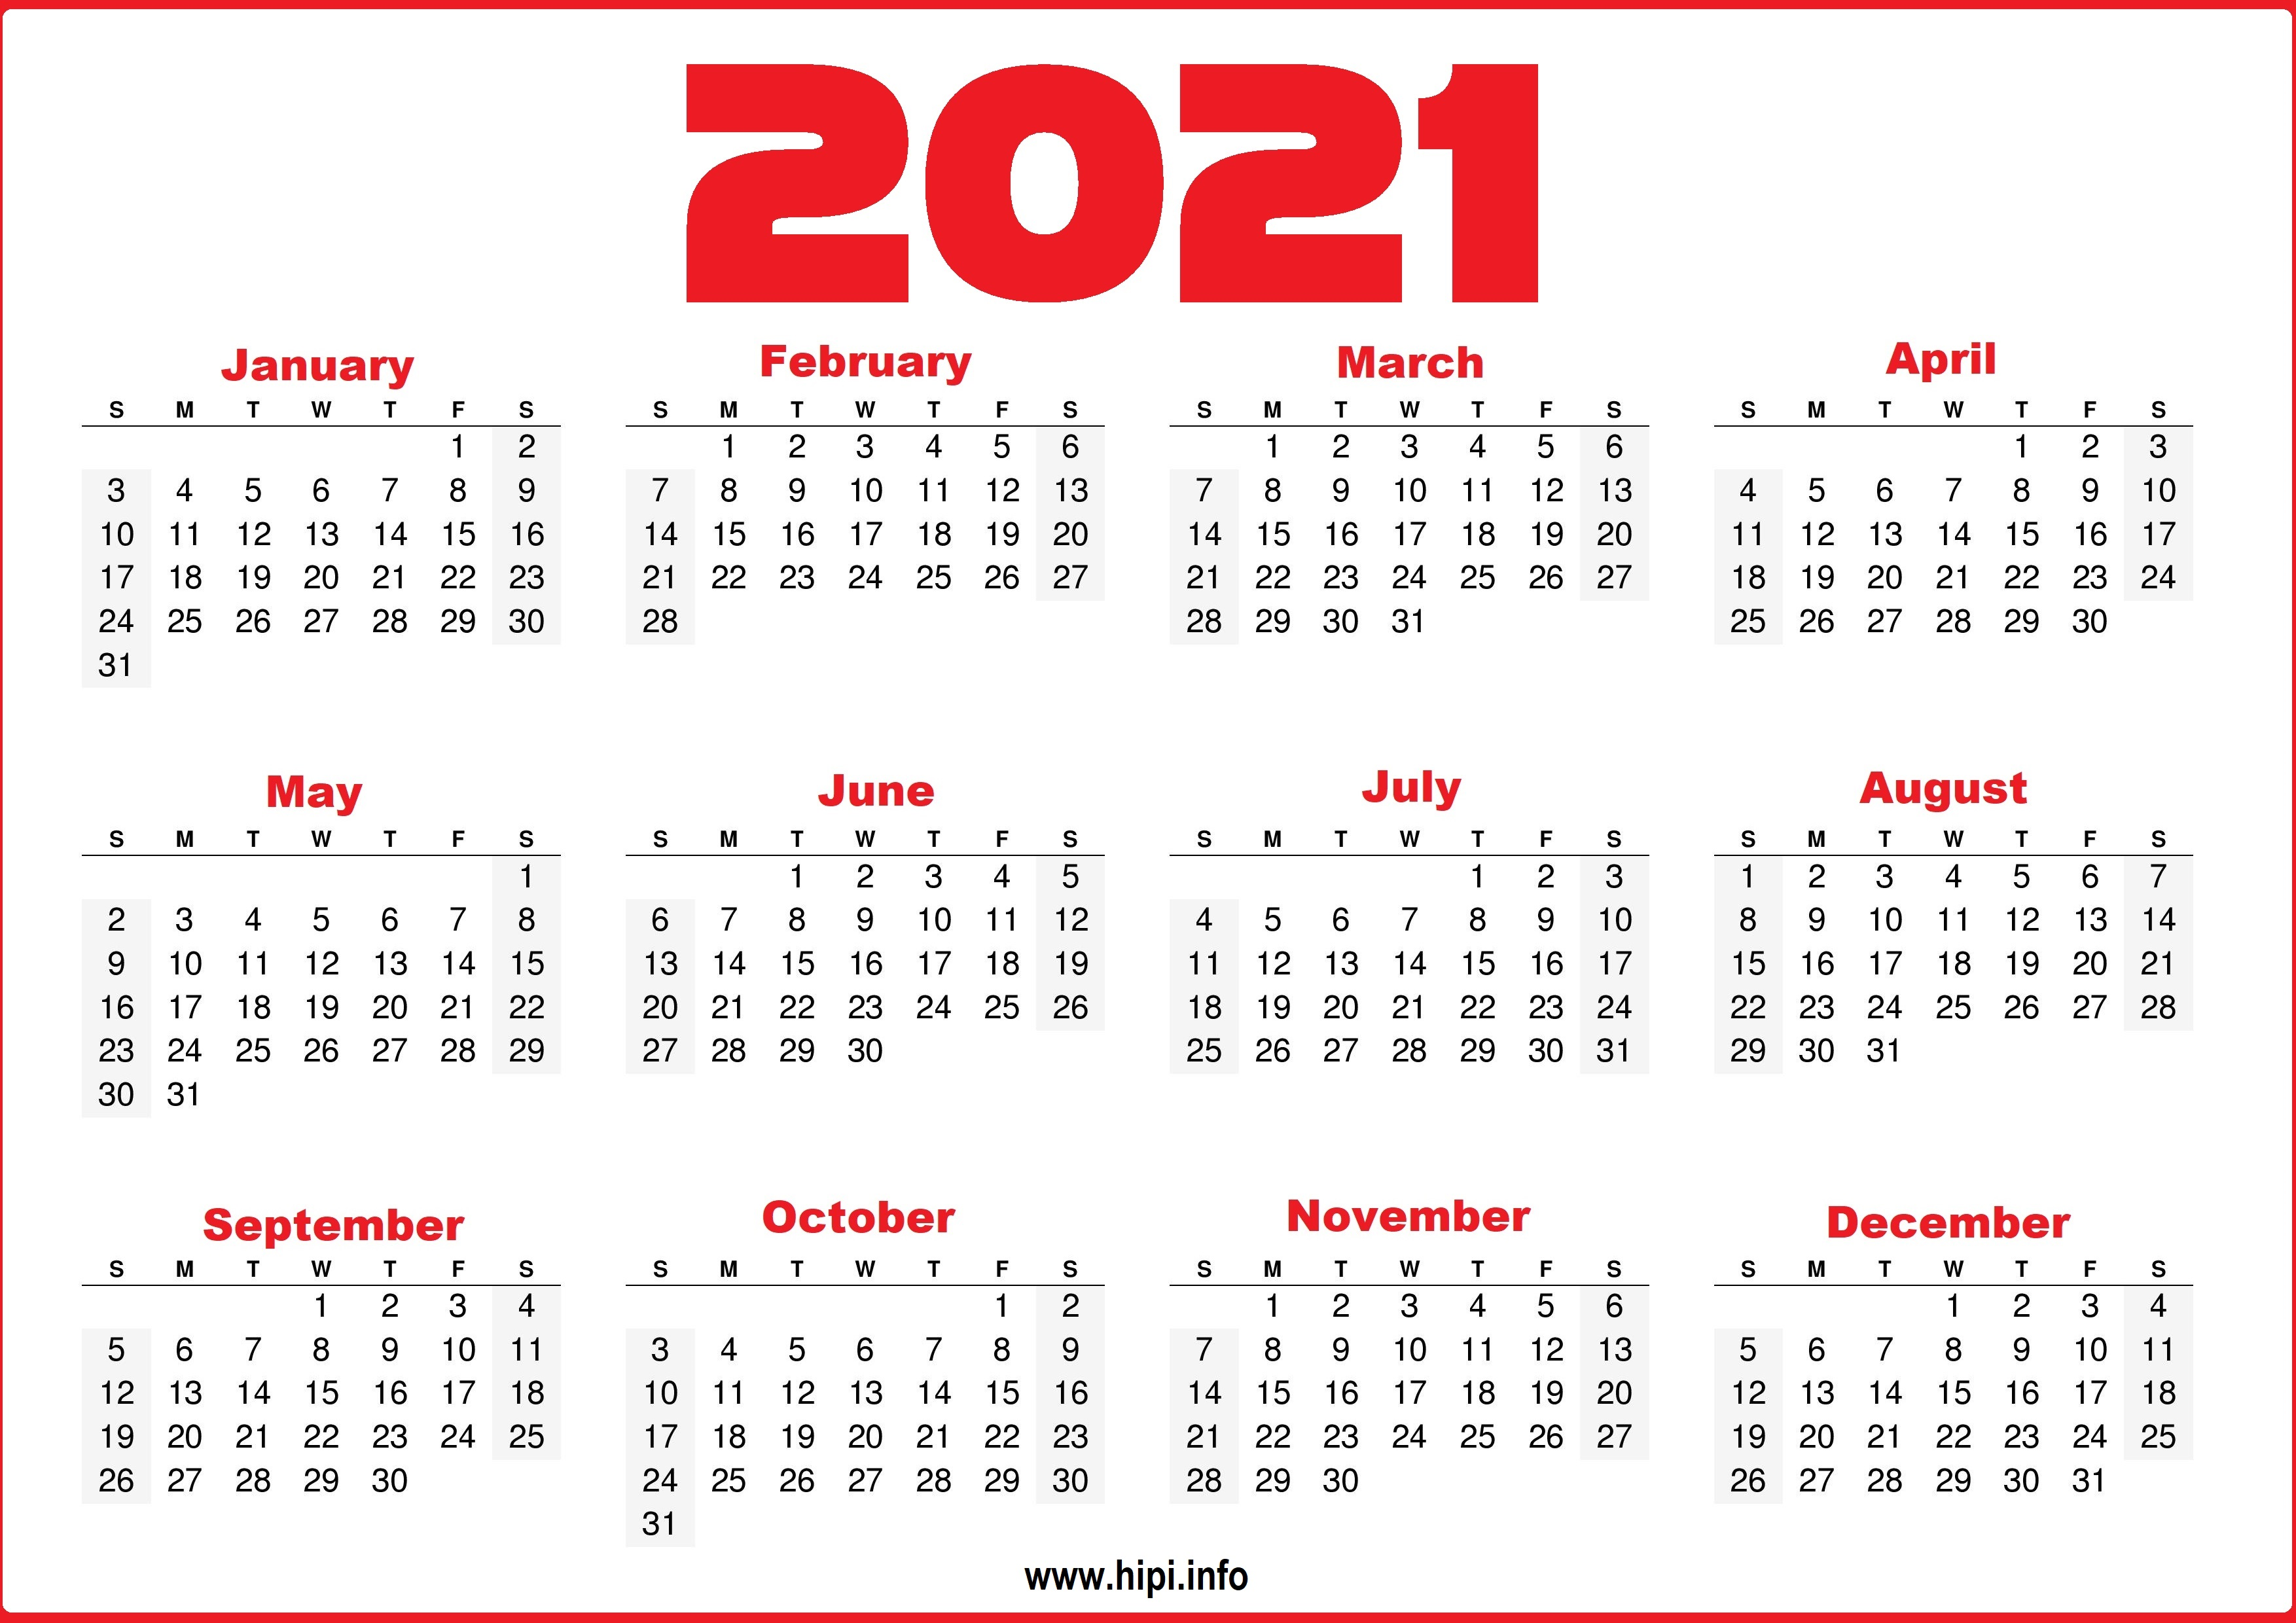 download-the-yearly-calendar-template-from-vertex42com-sunday-through